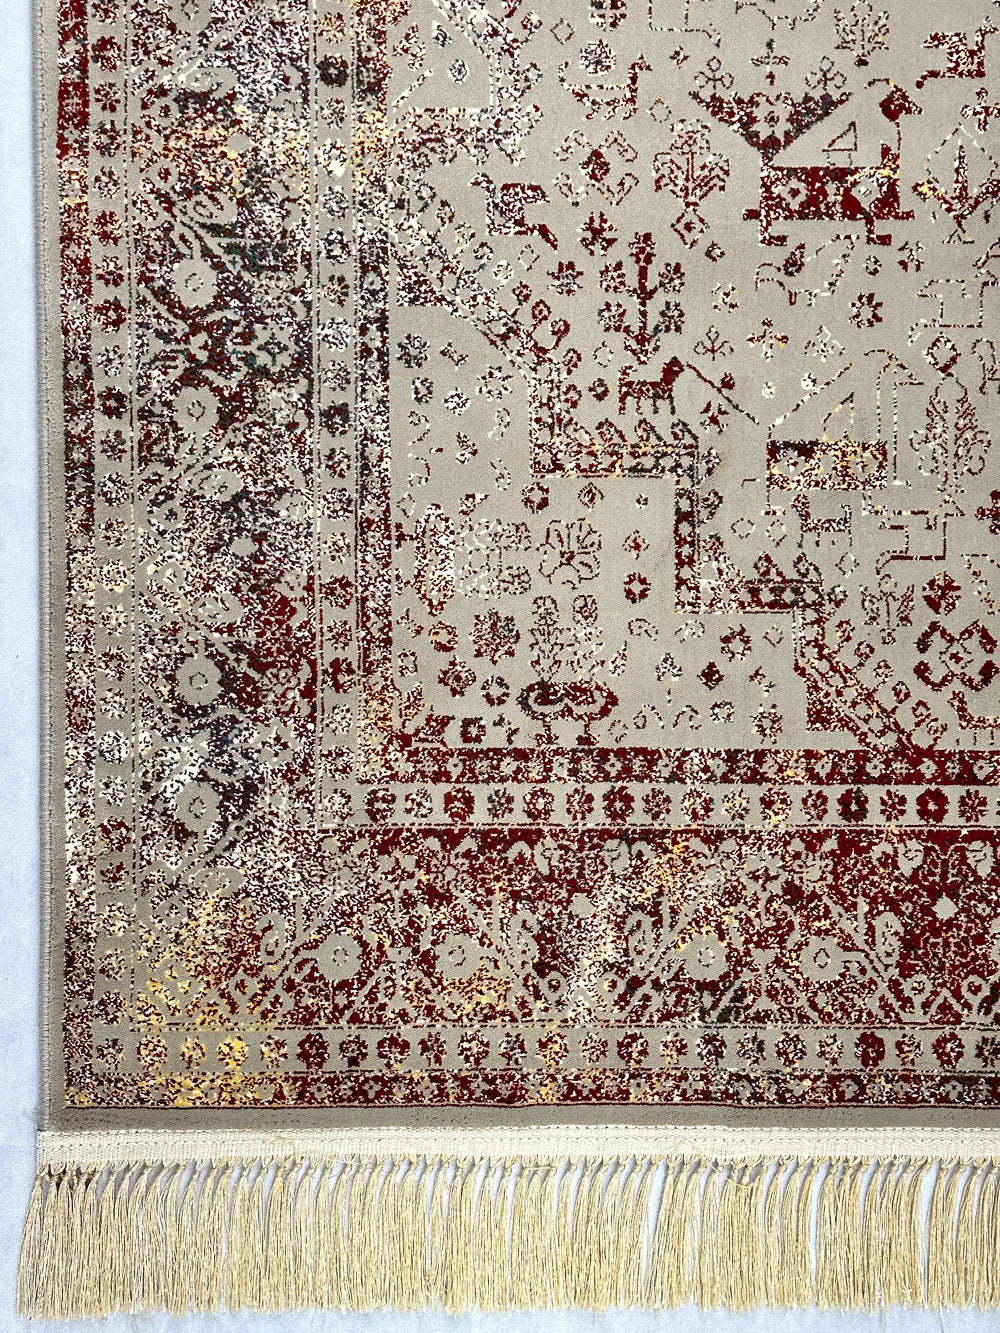 5 ft x 8 ft - Area Rug - Persian 700 Reeds - Nagina Mashad Helal 4 - Ivory and Red Wine